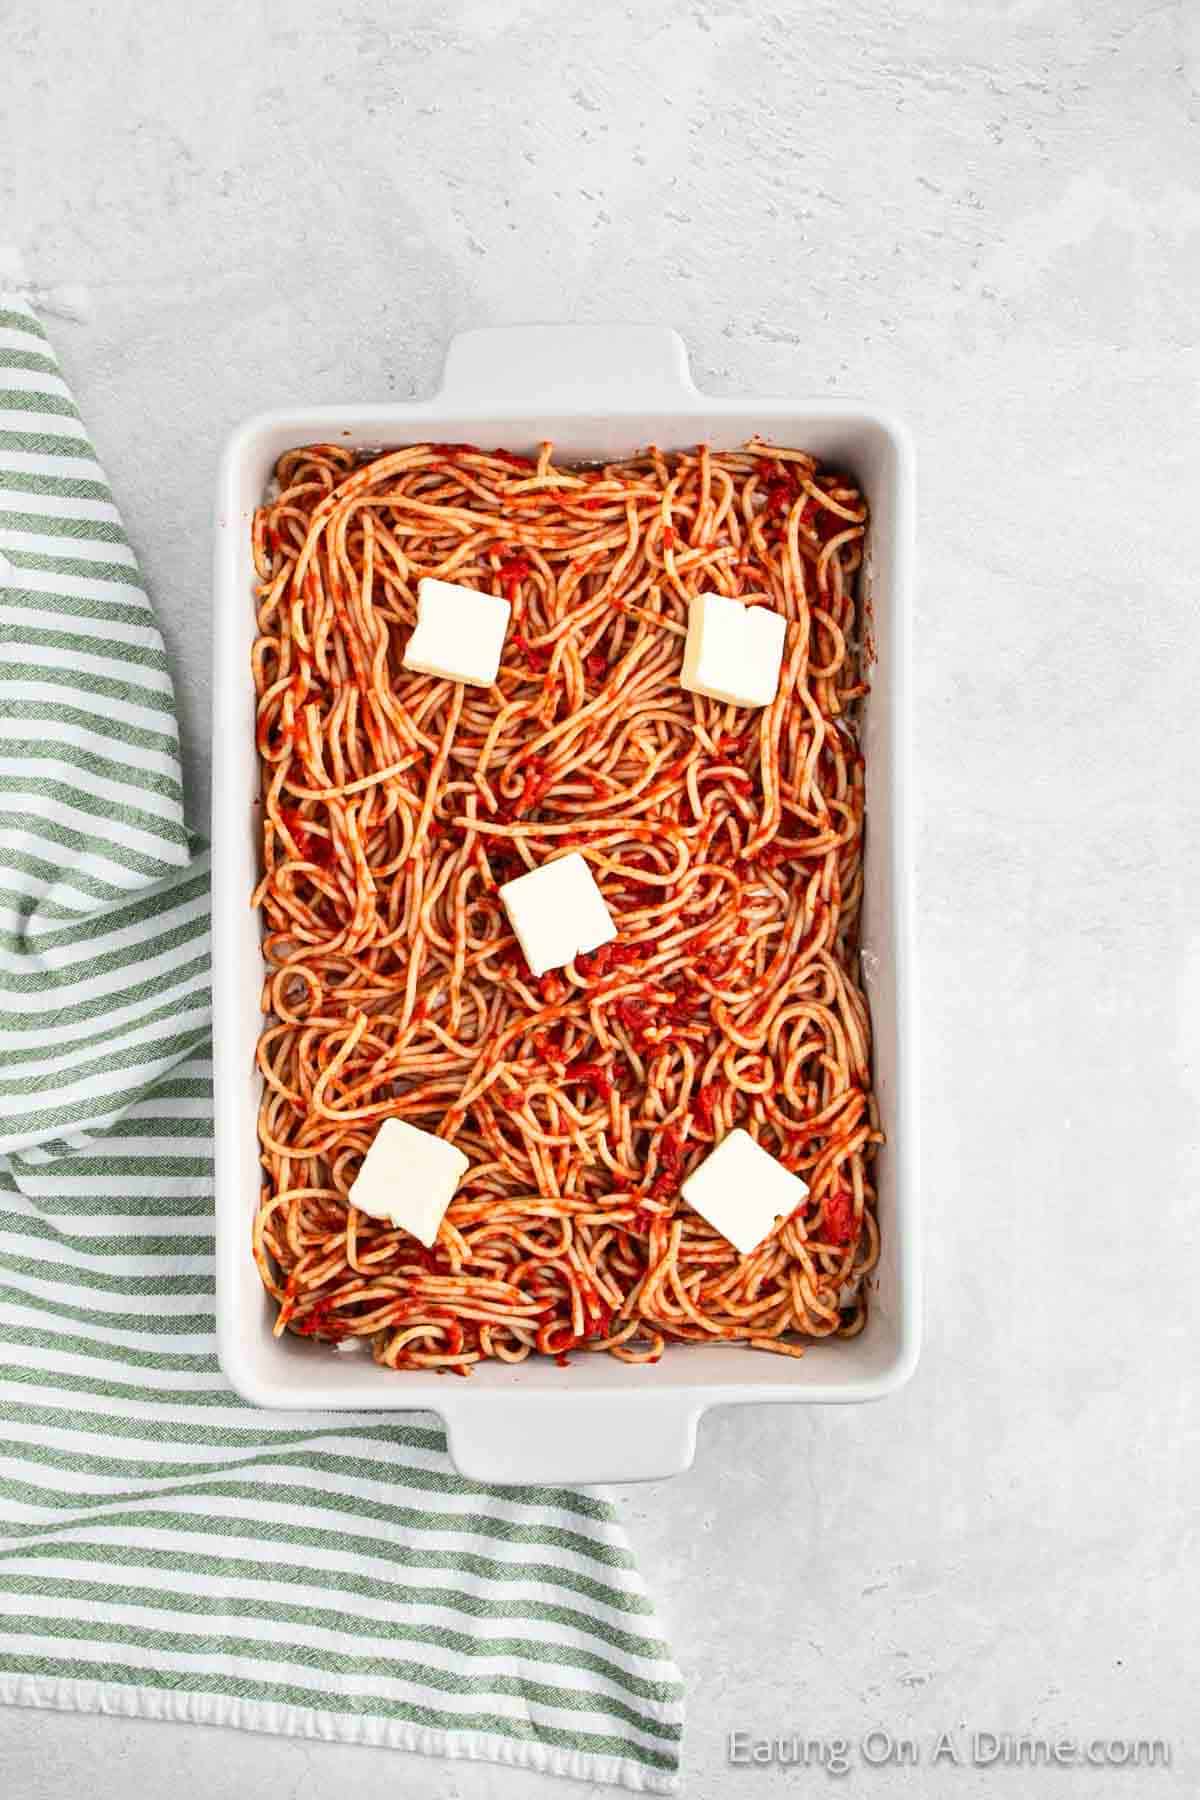 A rectangular white baking dish filled with cooked spaghetti and topped with six small squares of butter, showcasing a million dollar spaghetti recipe. The dish is placed on a light gray surface next to a folded, striped green and white kitchen towel.